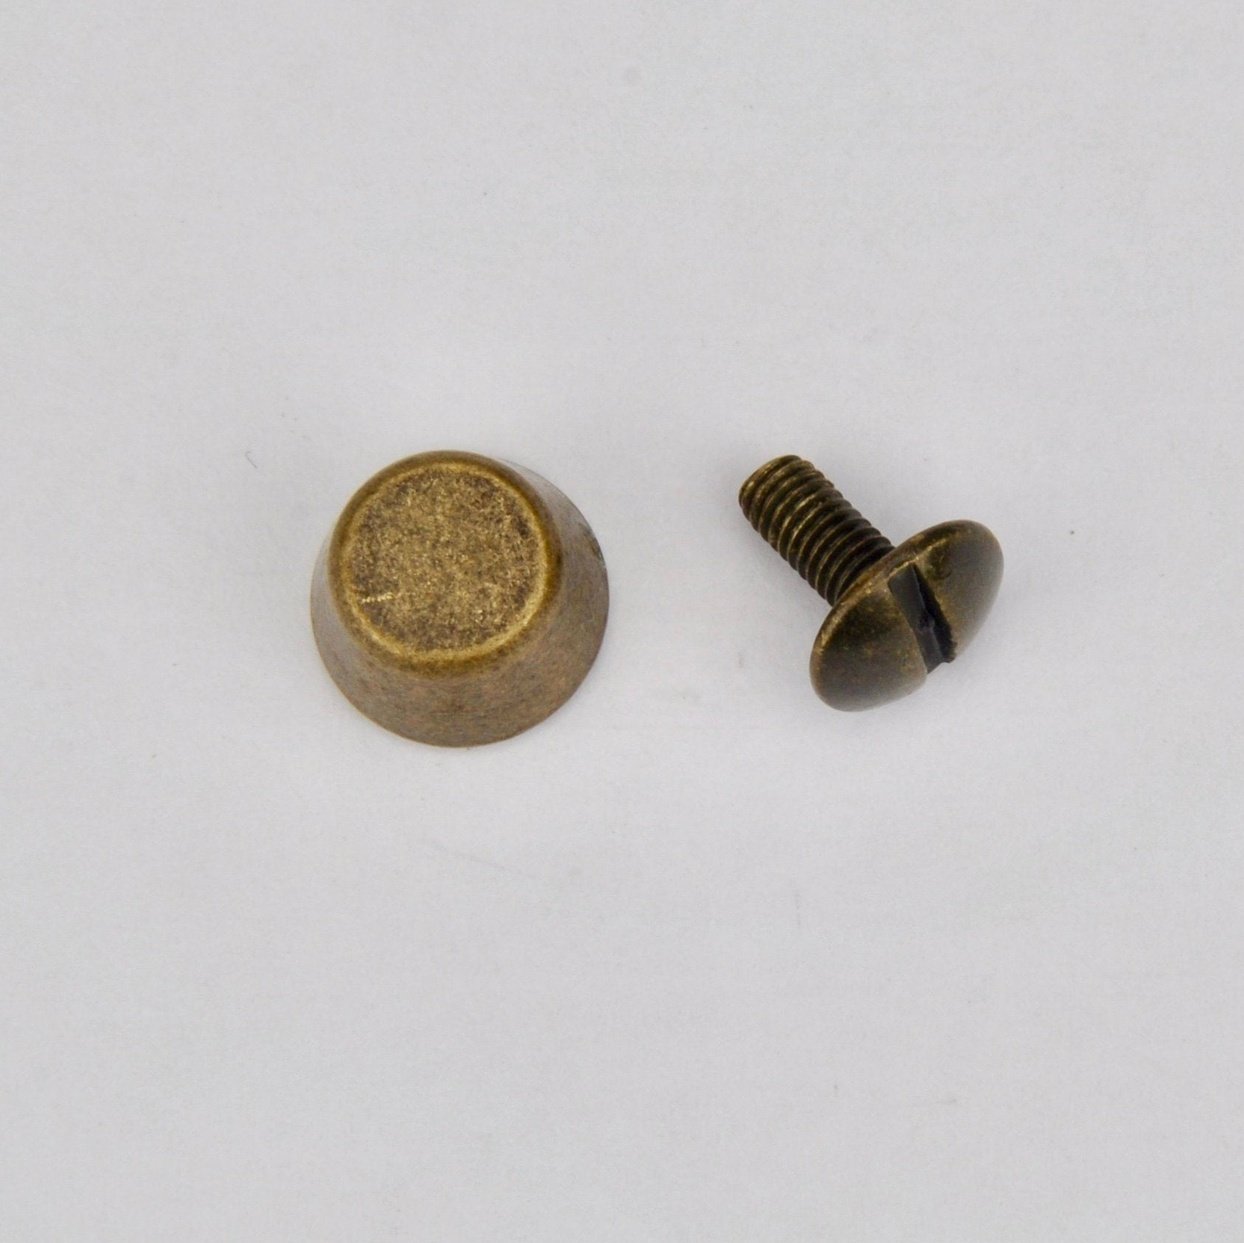 Foot Old Gold 3x7 mm